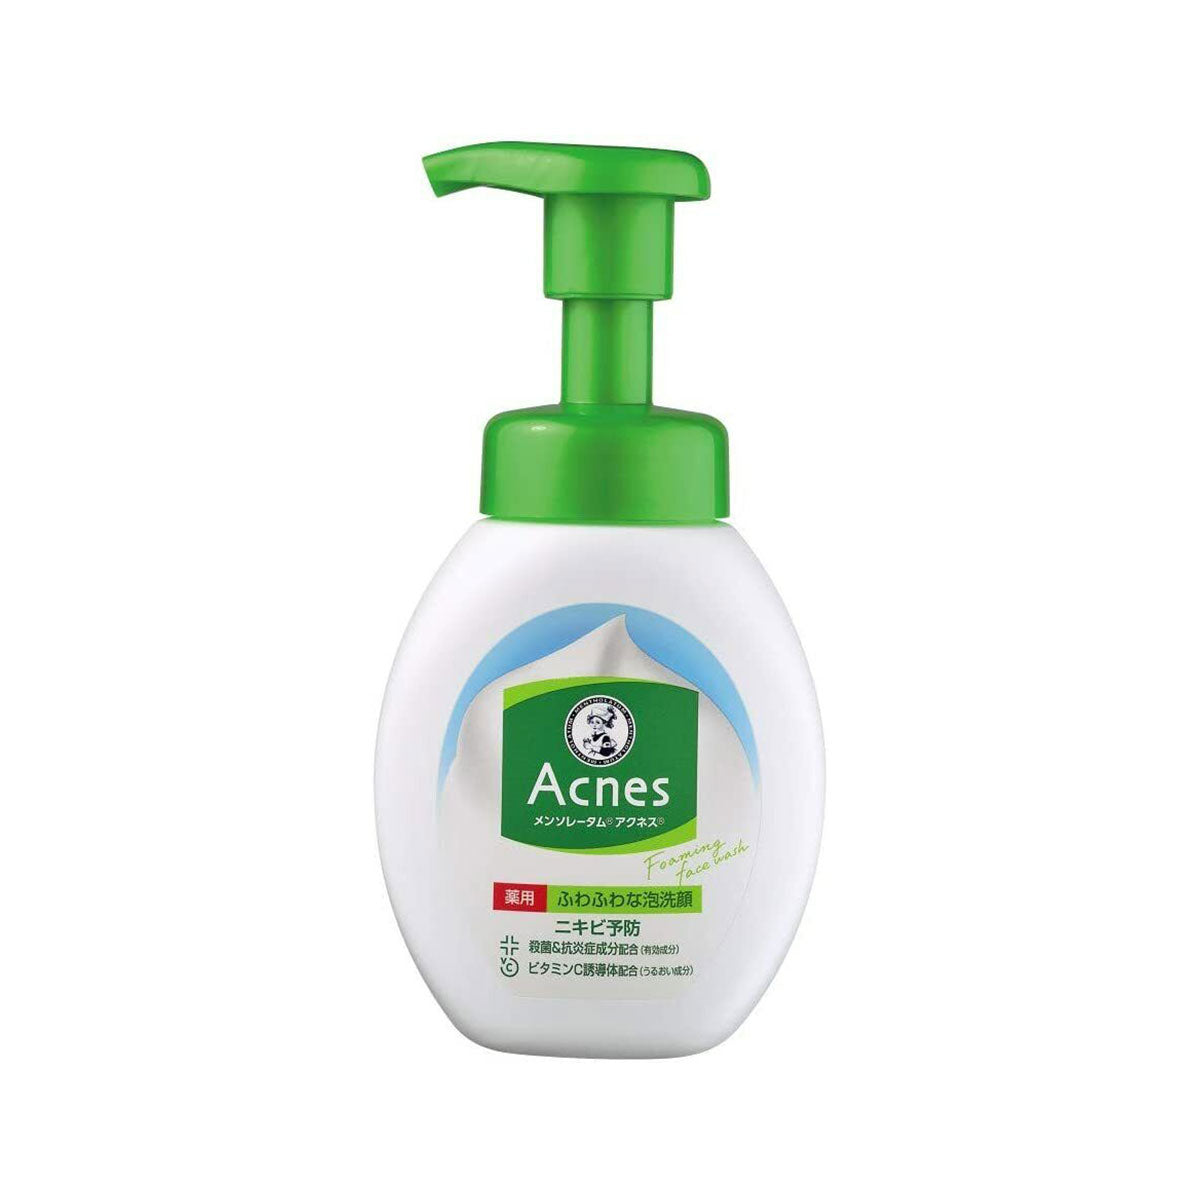 Acnes Medicated Viamine Face Wash Foam Cleanser 160ml